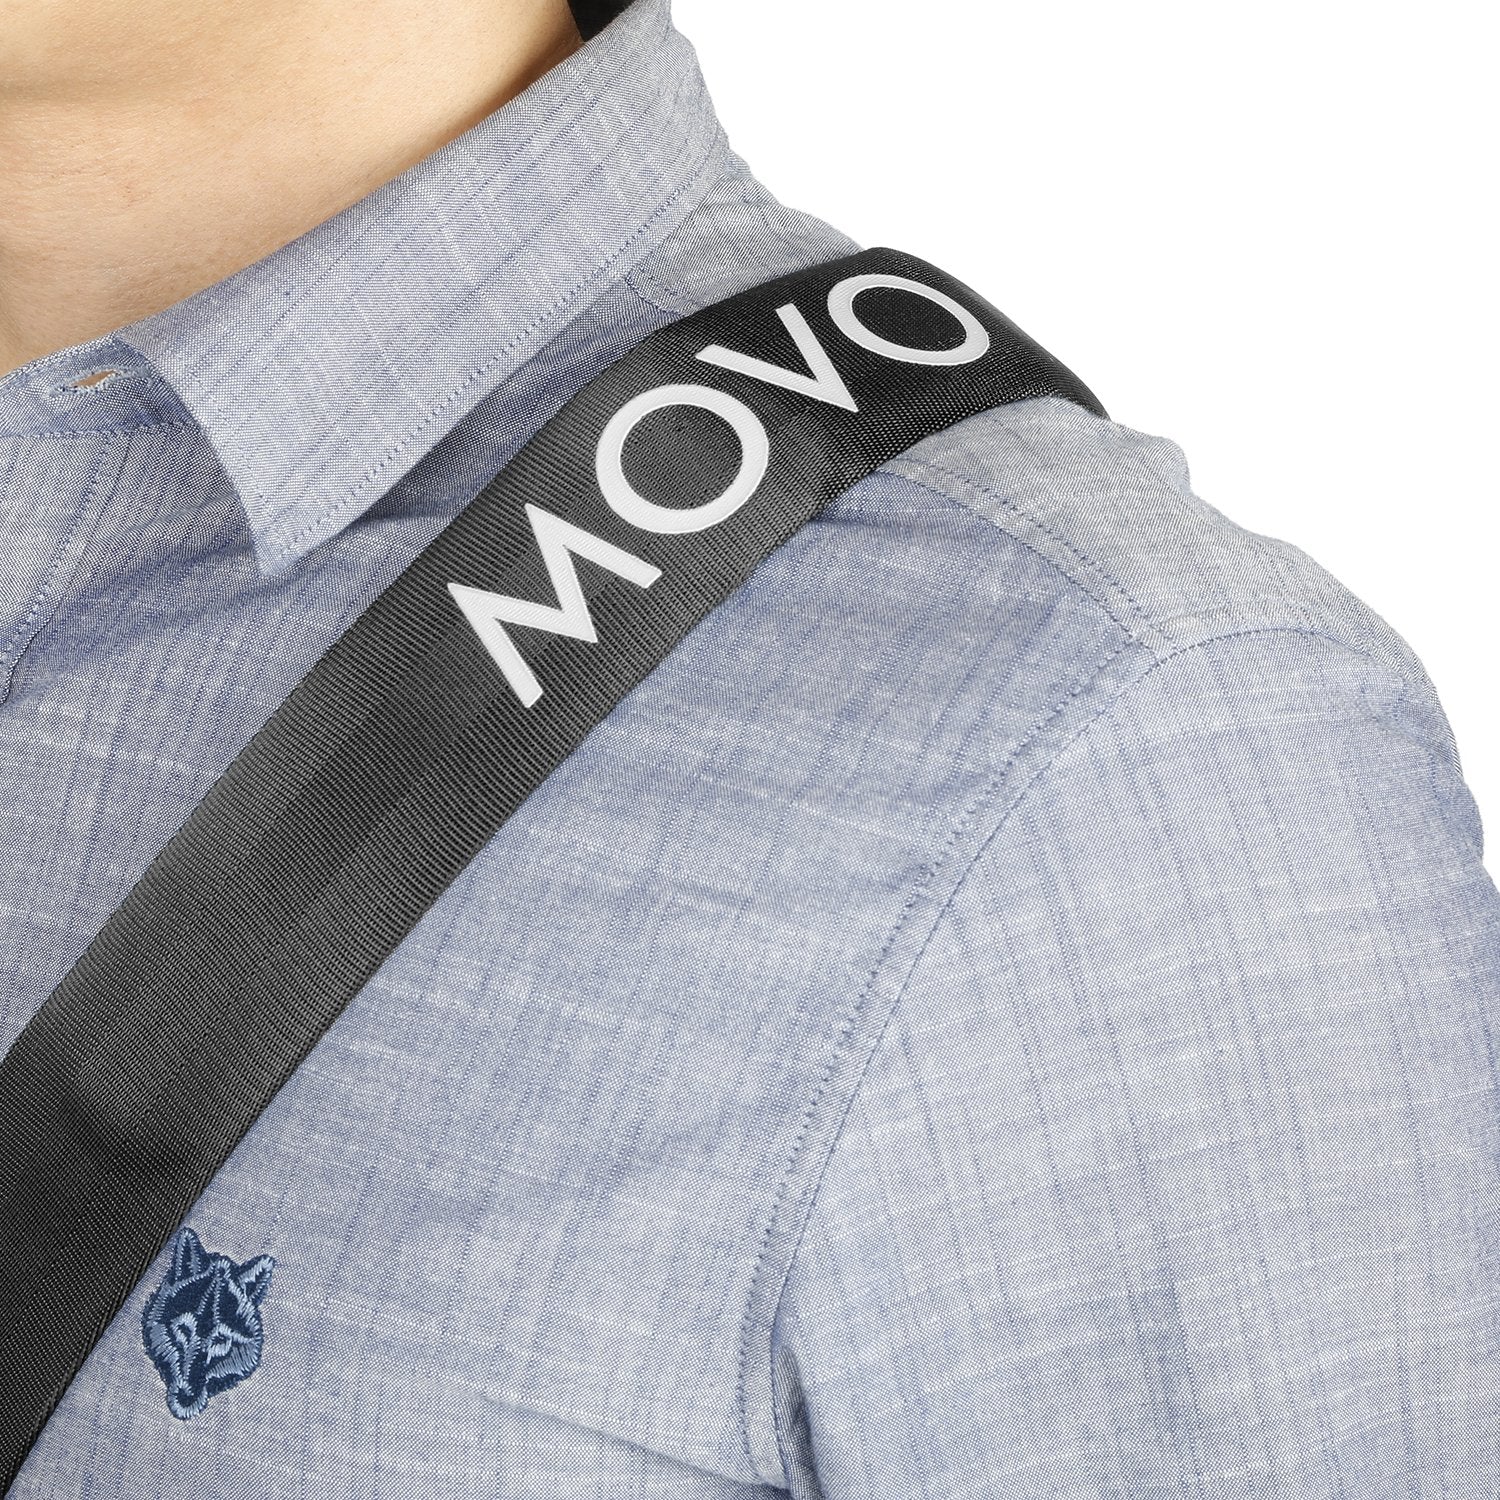 Movo Ultrasoft Nylon-Webbed Shoulder/Sling Camera Strap with Anti-Fatigue Gel Neck Pad for Cameras and Binoculars (Black)  - Acceptable